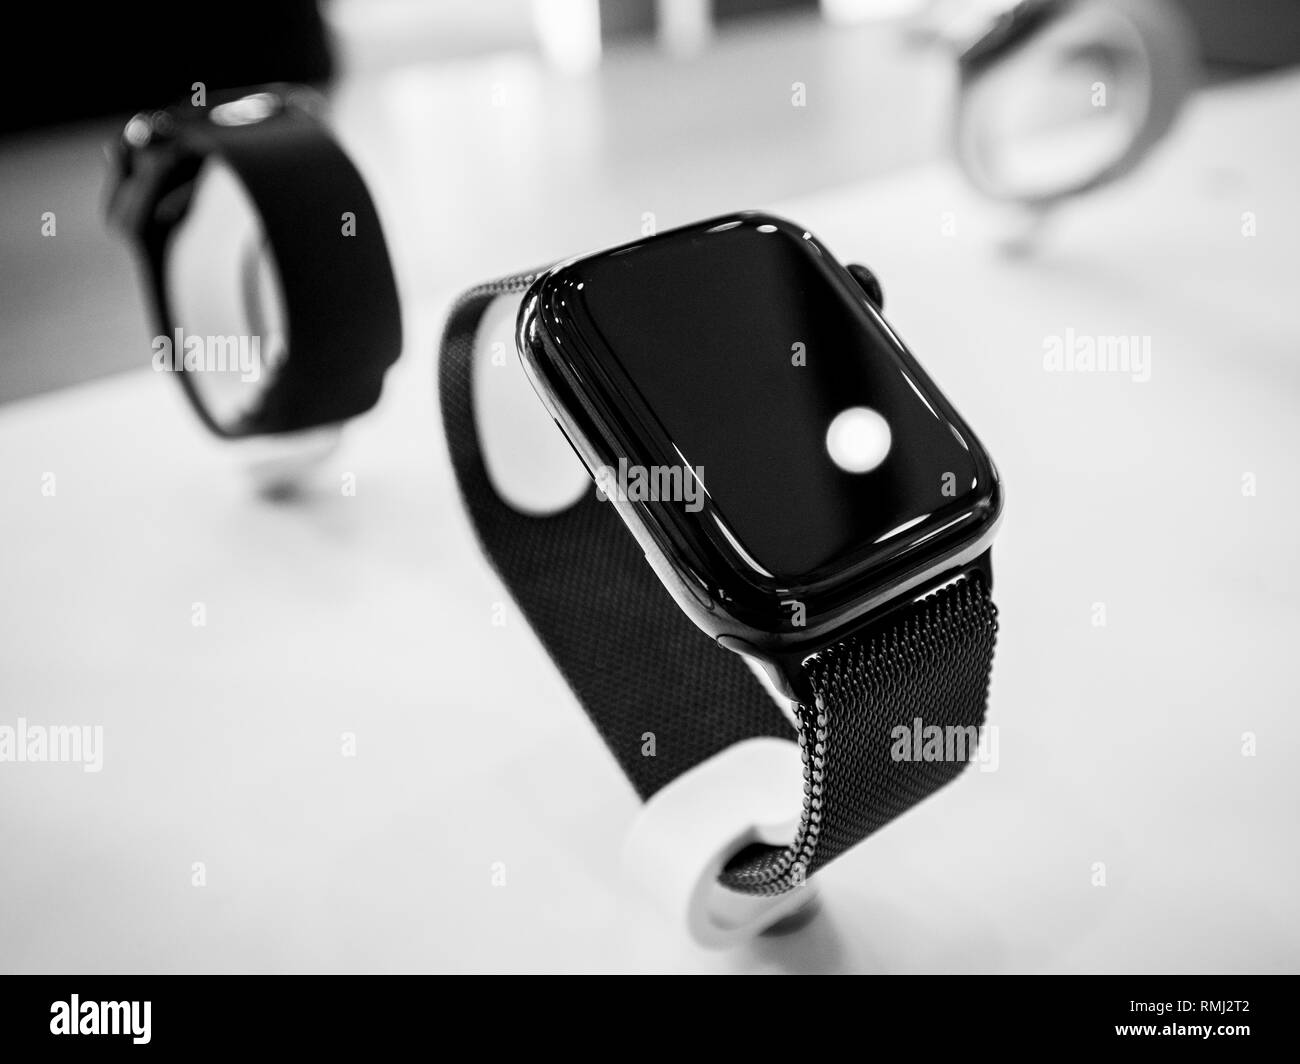 STRASBOURG, FRANCE - SEP 21, 2018: Apple Store with customers people buying admiring the new latest Apple Computers Watch Series 4 wearable black steel color - black and white Stock Photo